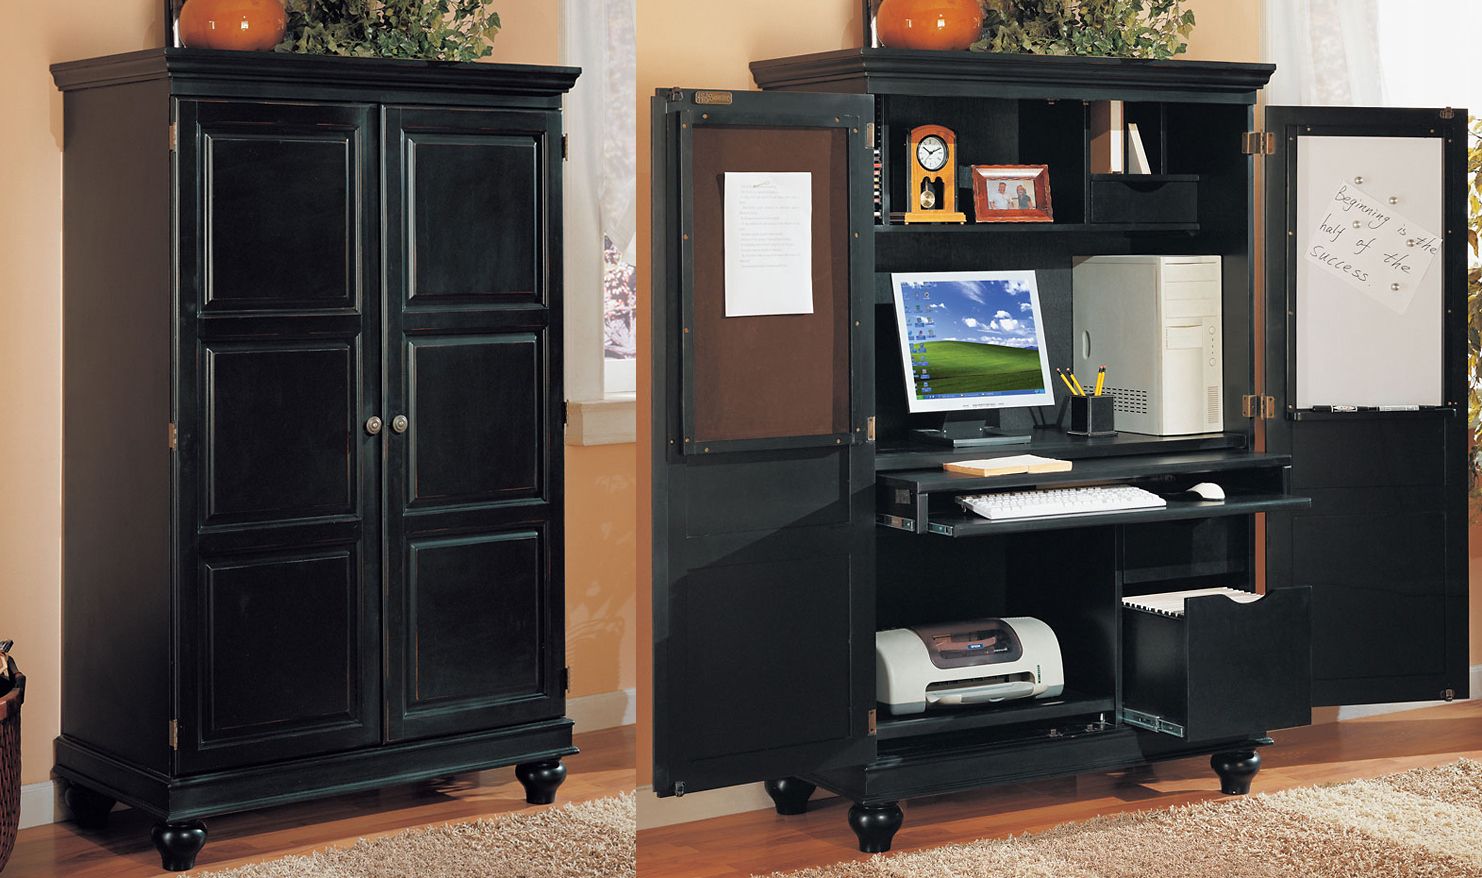 Maximize Space with a Corner Armoire Computer Desk